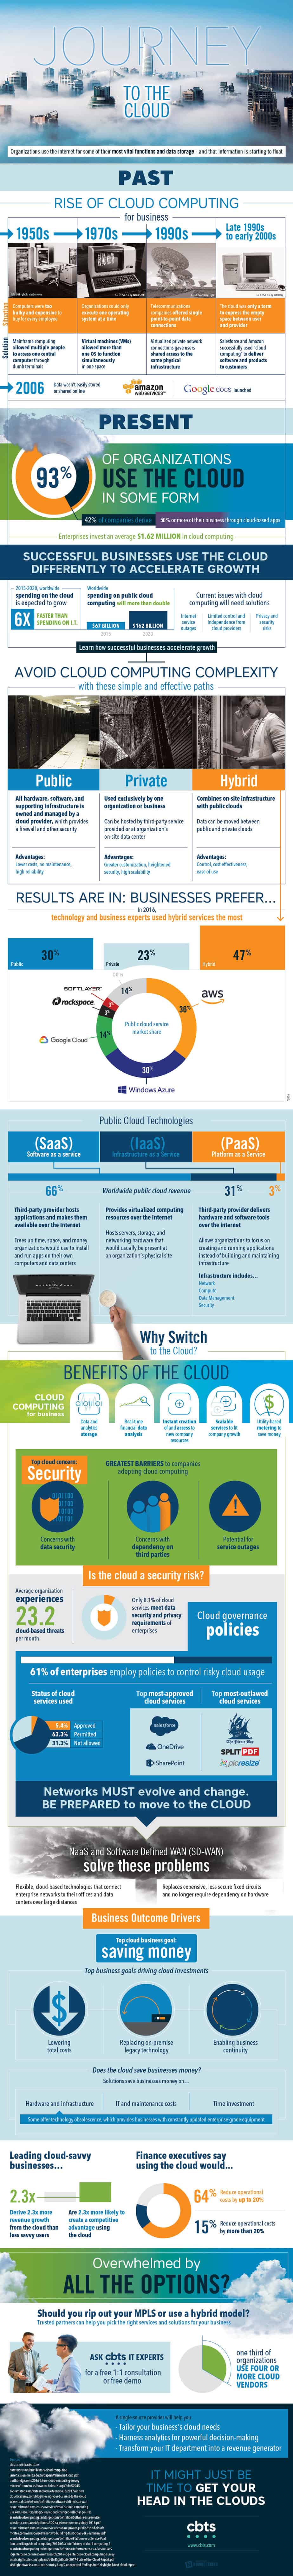 CBTS-Journey-to-the-Cloud-Infographic